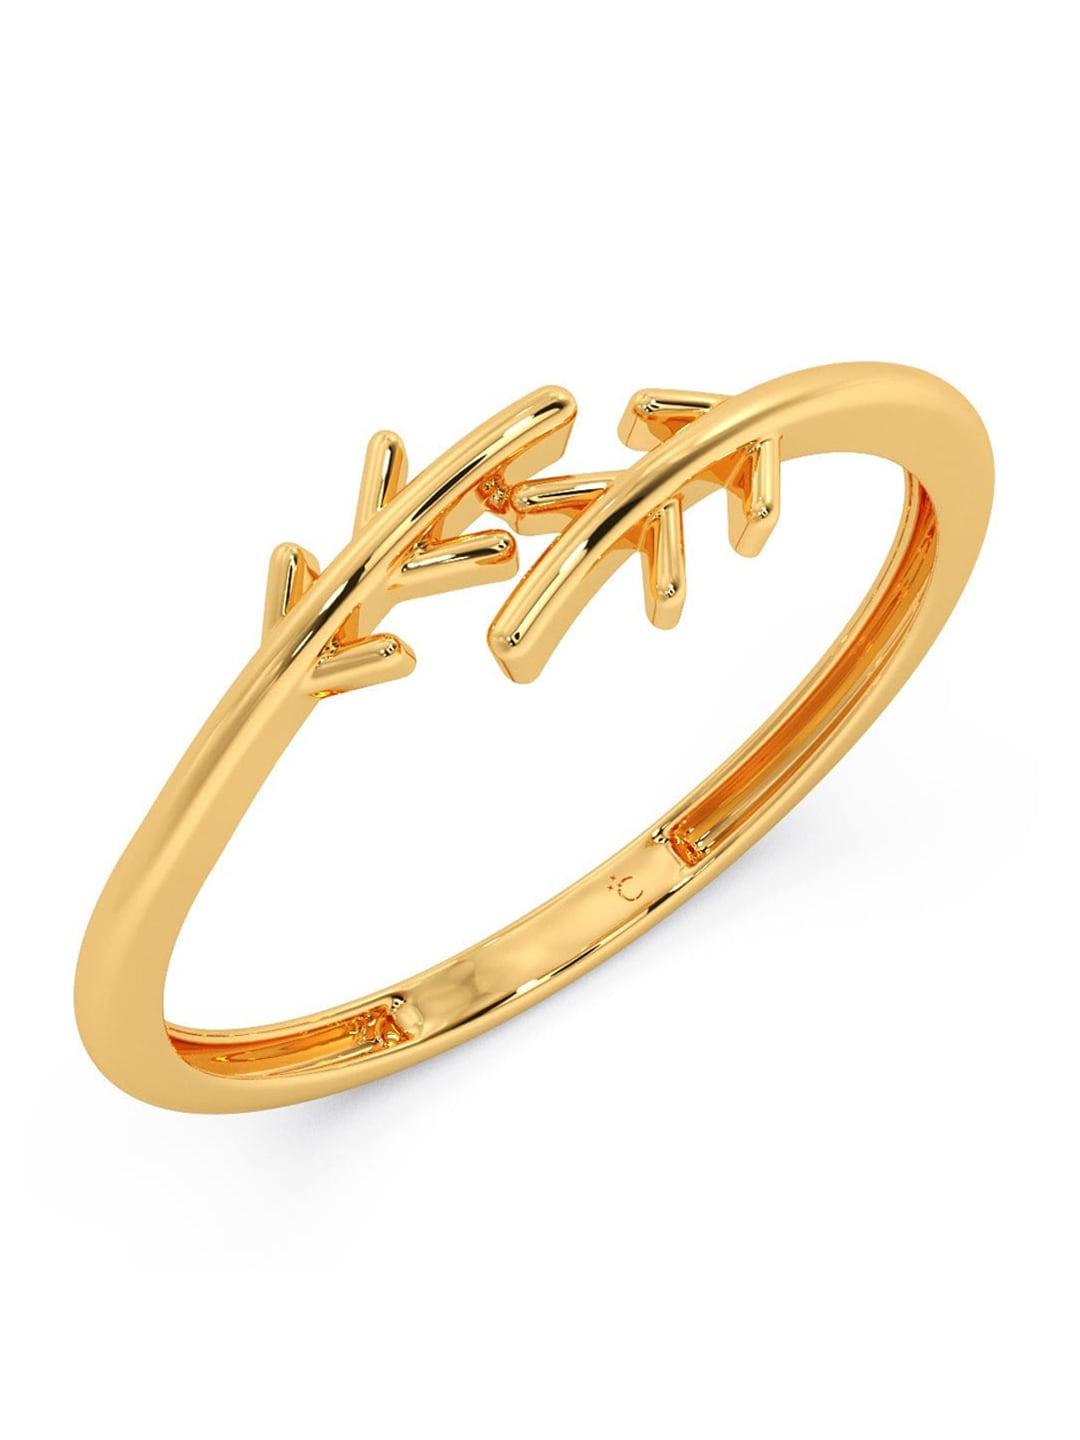 candere-a-kalyan-jewellers-company-18kt-gold-ring-0.66gm